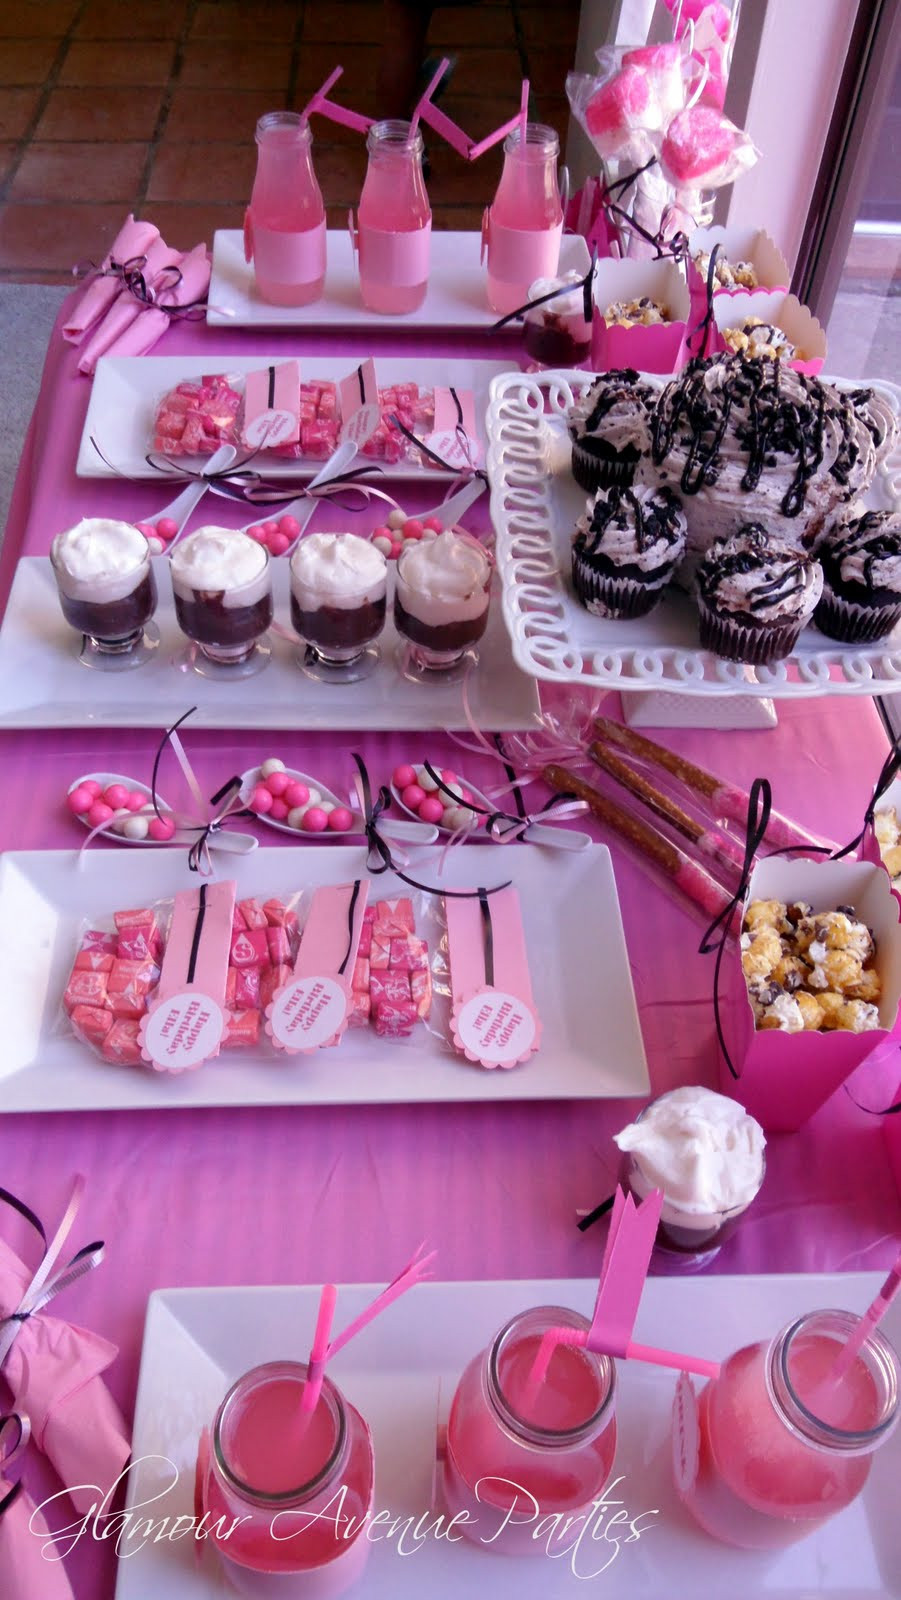 Birthday Party Ideas For Girls Age 12
 Glamour Avenue Parties the Blog Glamorous Barbie